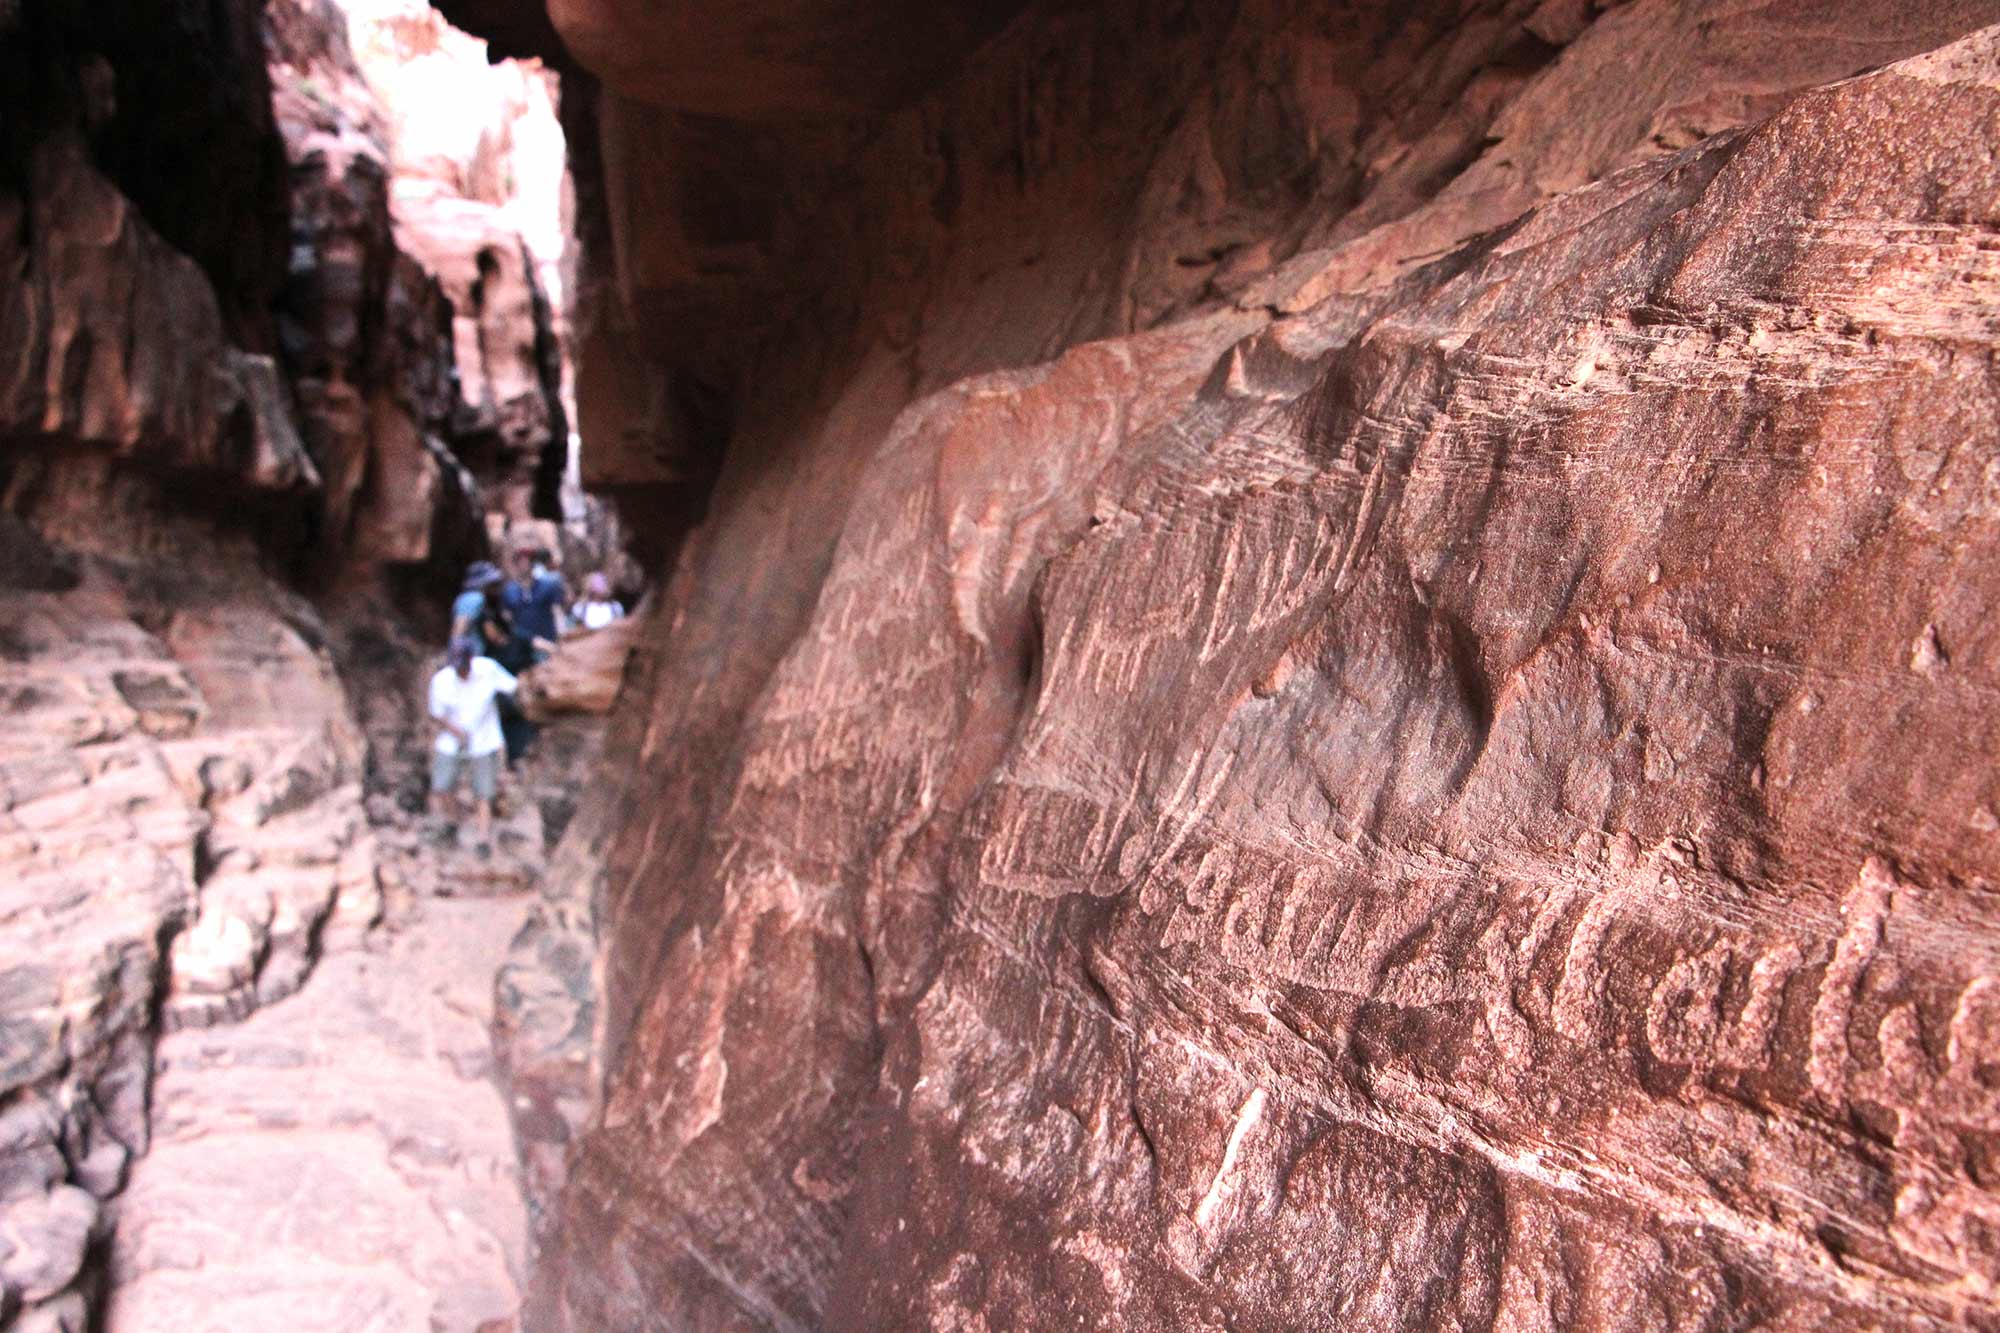 Tourists admiring the proto-Arabic writing and other ancient art carved into the walls of Khazali Canyon in Wadi Rum, Jordan